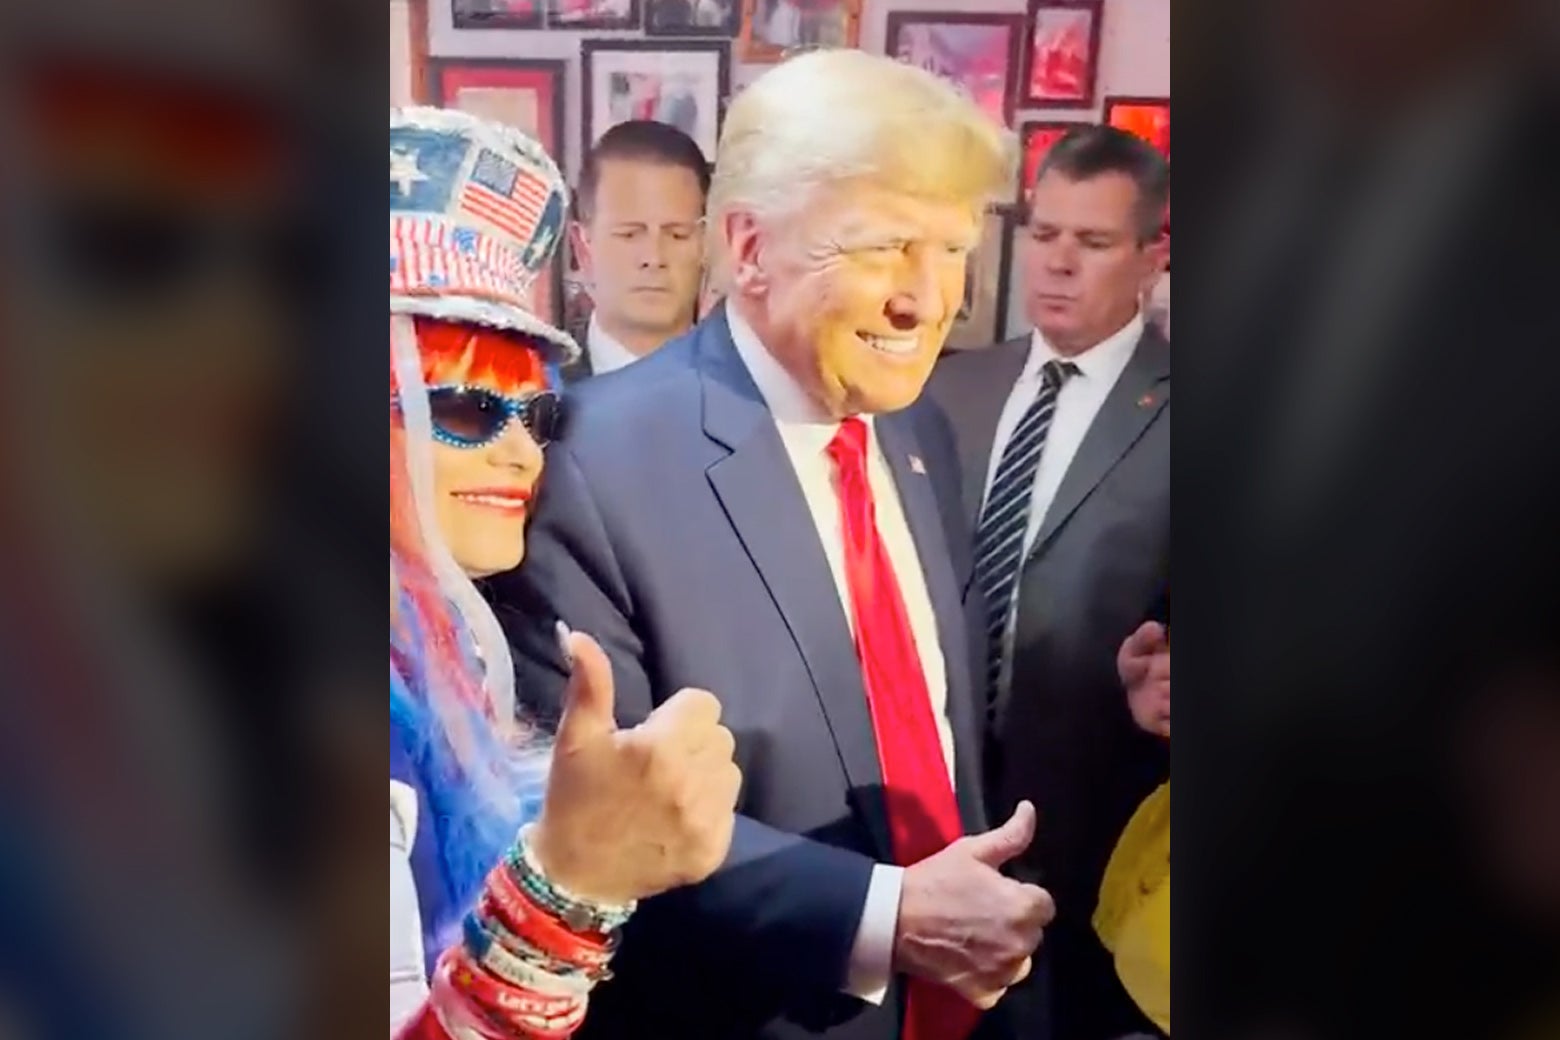 A still image from a video in which Trump and Larson-Olson, who is wearing a red, white, and blue hat and has similarly colored streamers in her hair and bracelets on her wrist, give thumbs up gestures.